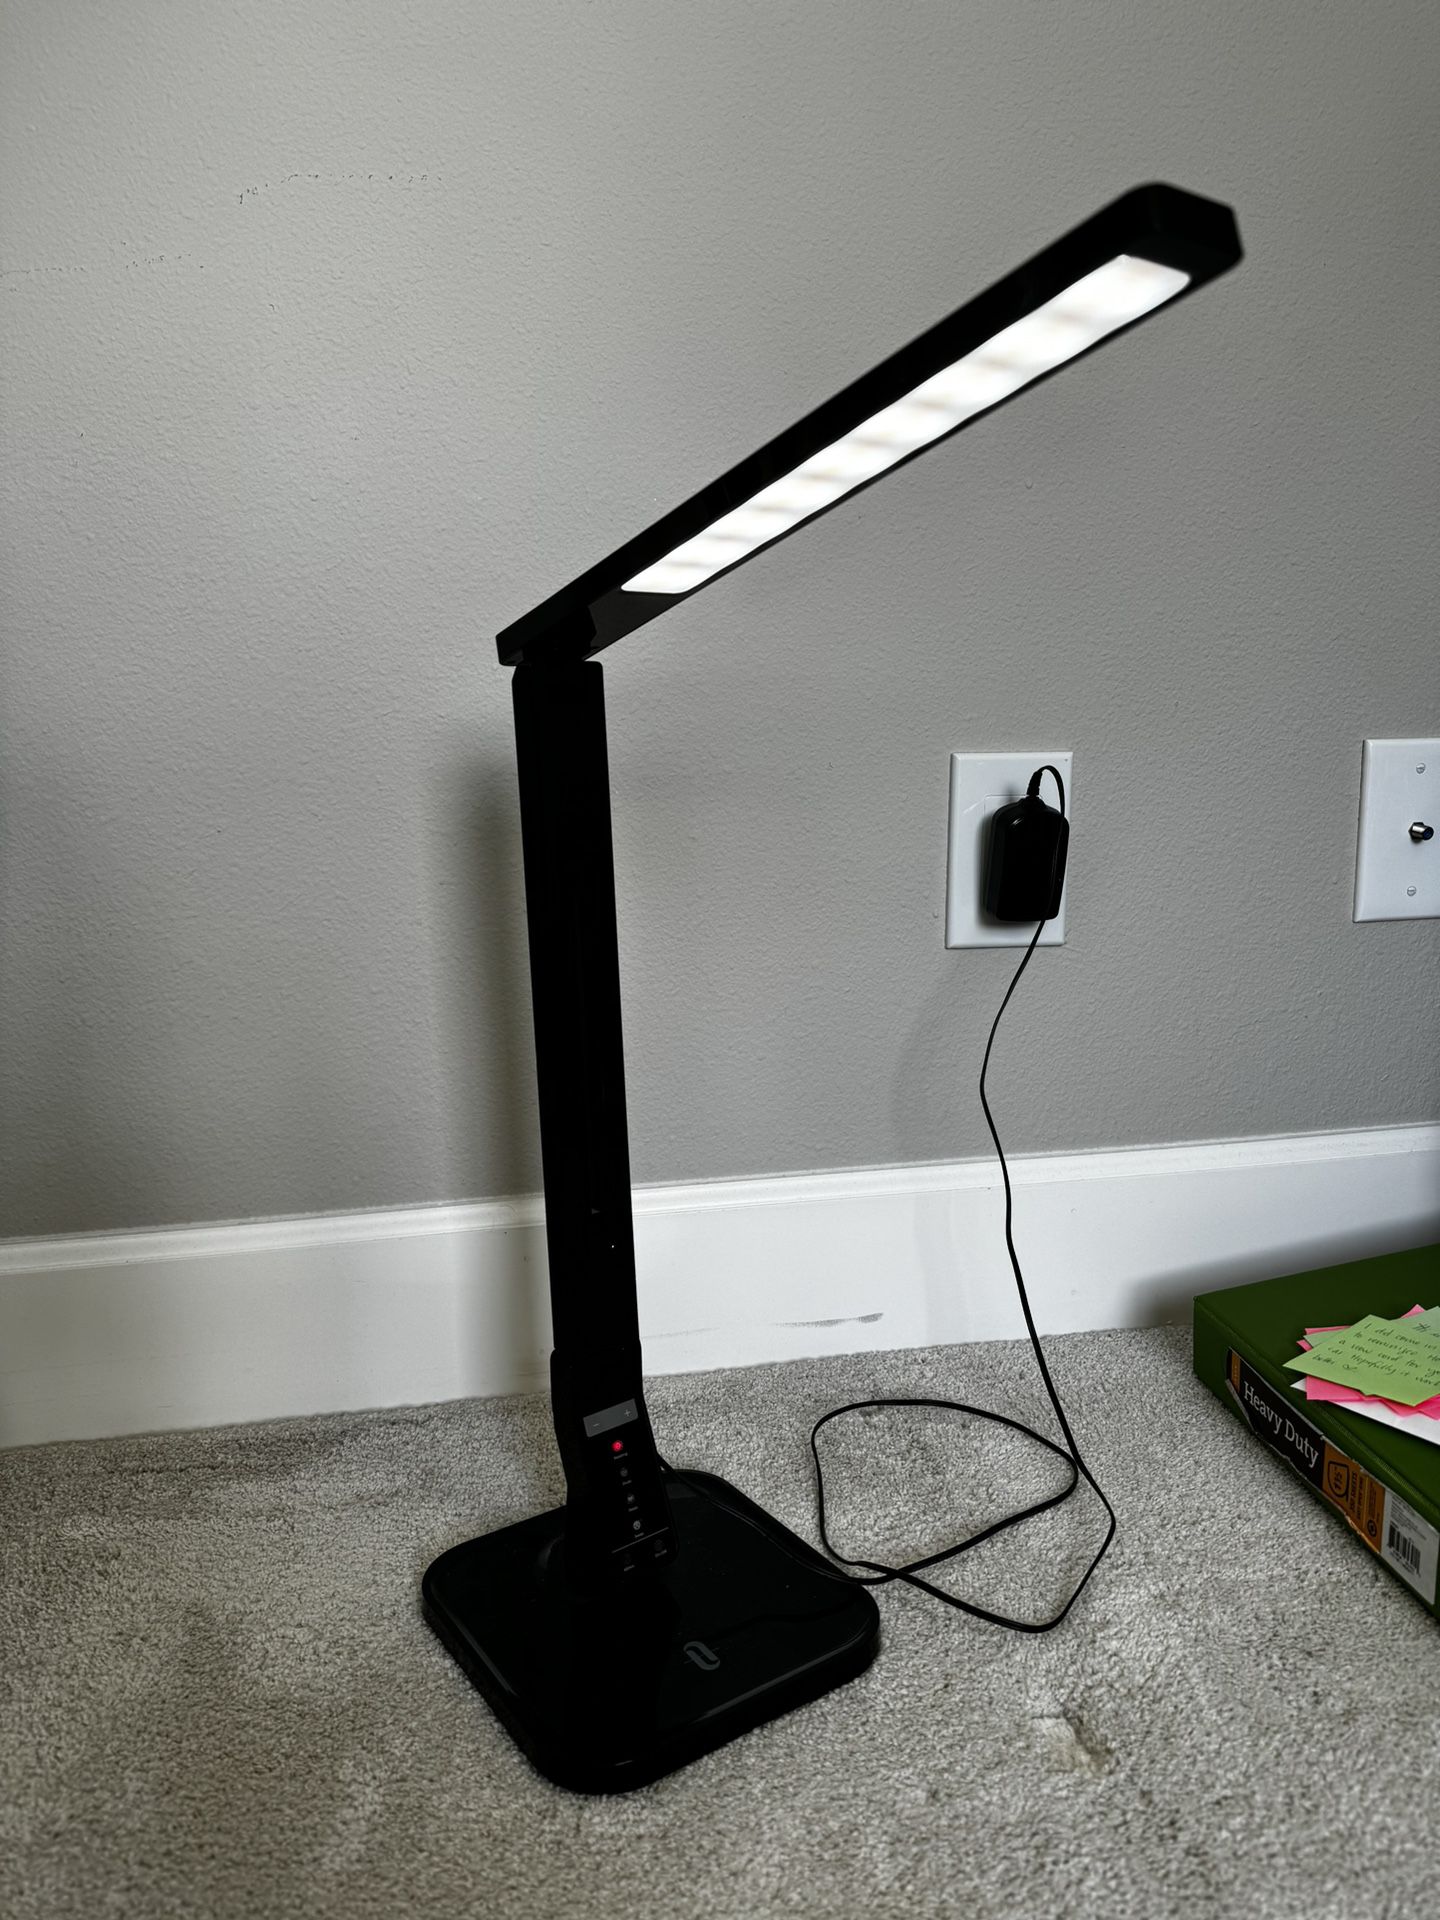 LED Desk Lamp (Dimmable) with USB port